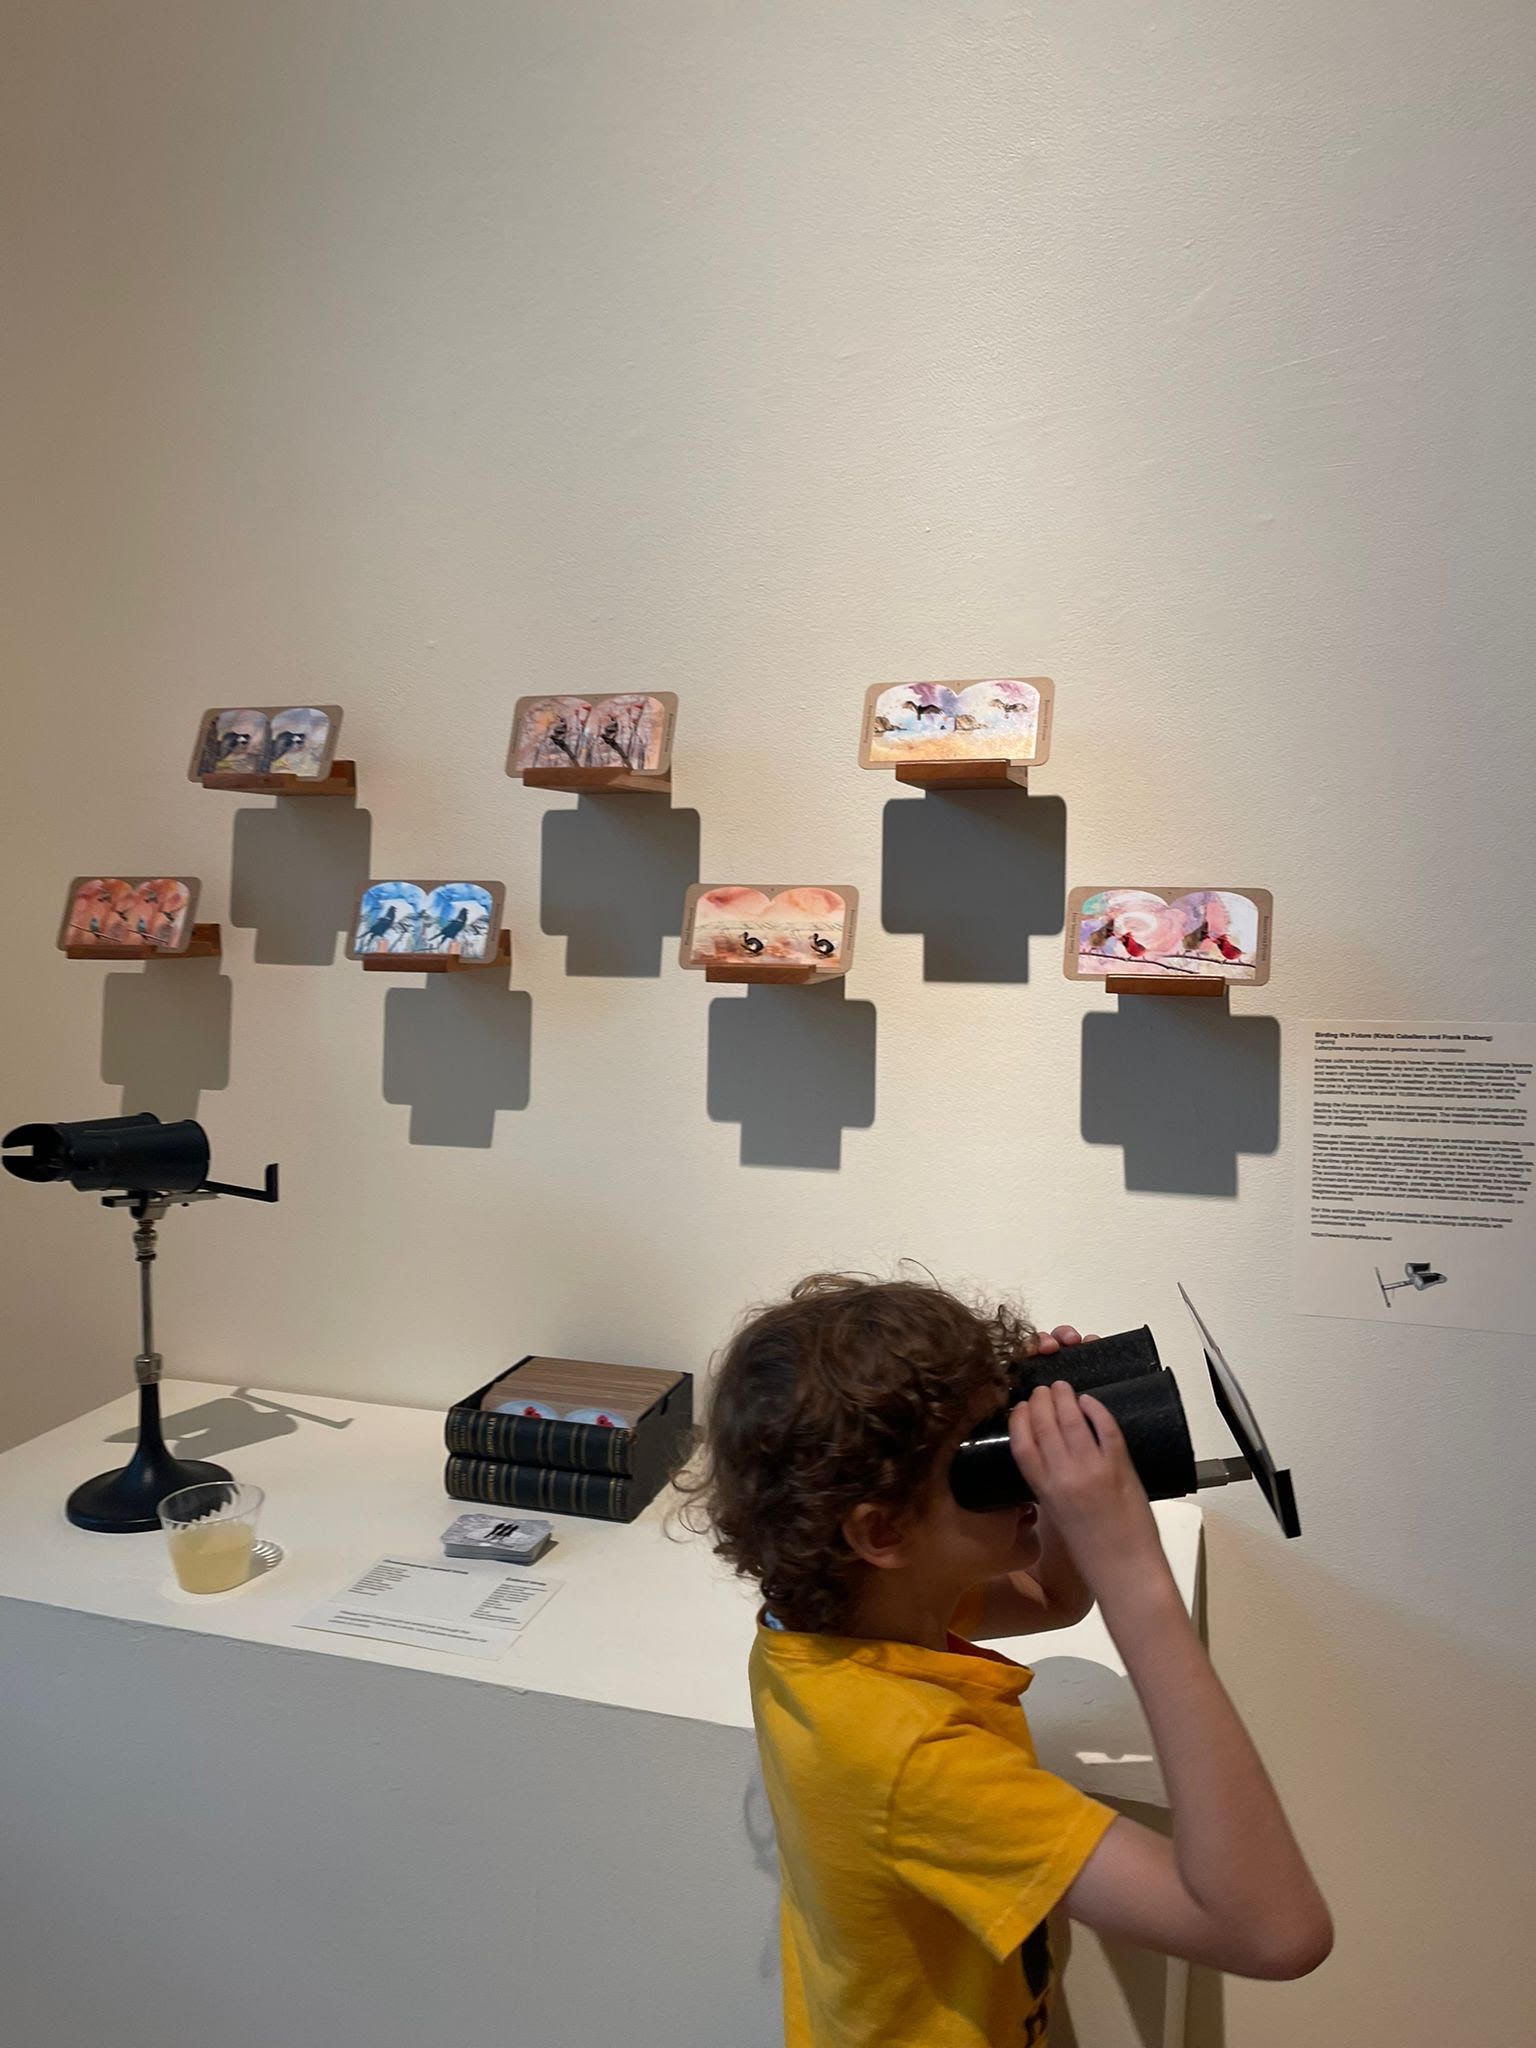 A child looks through a stereoscope.